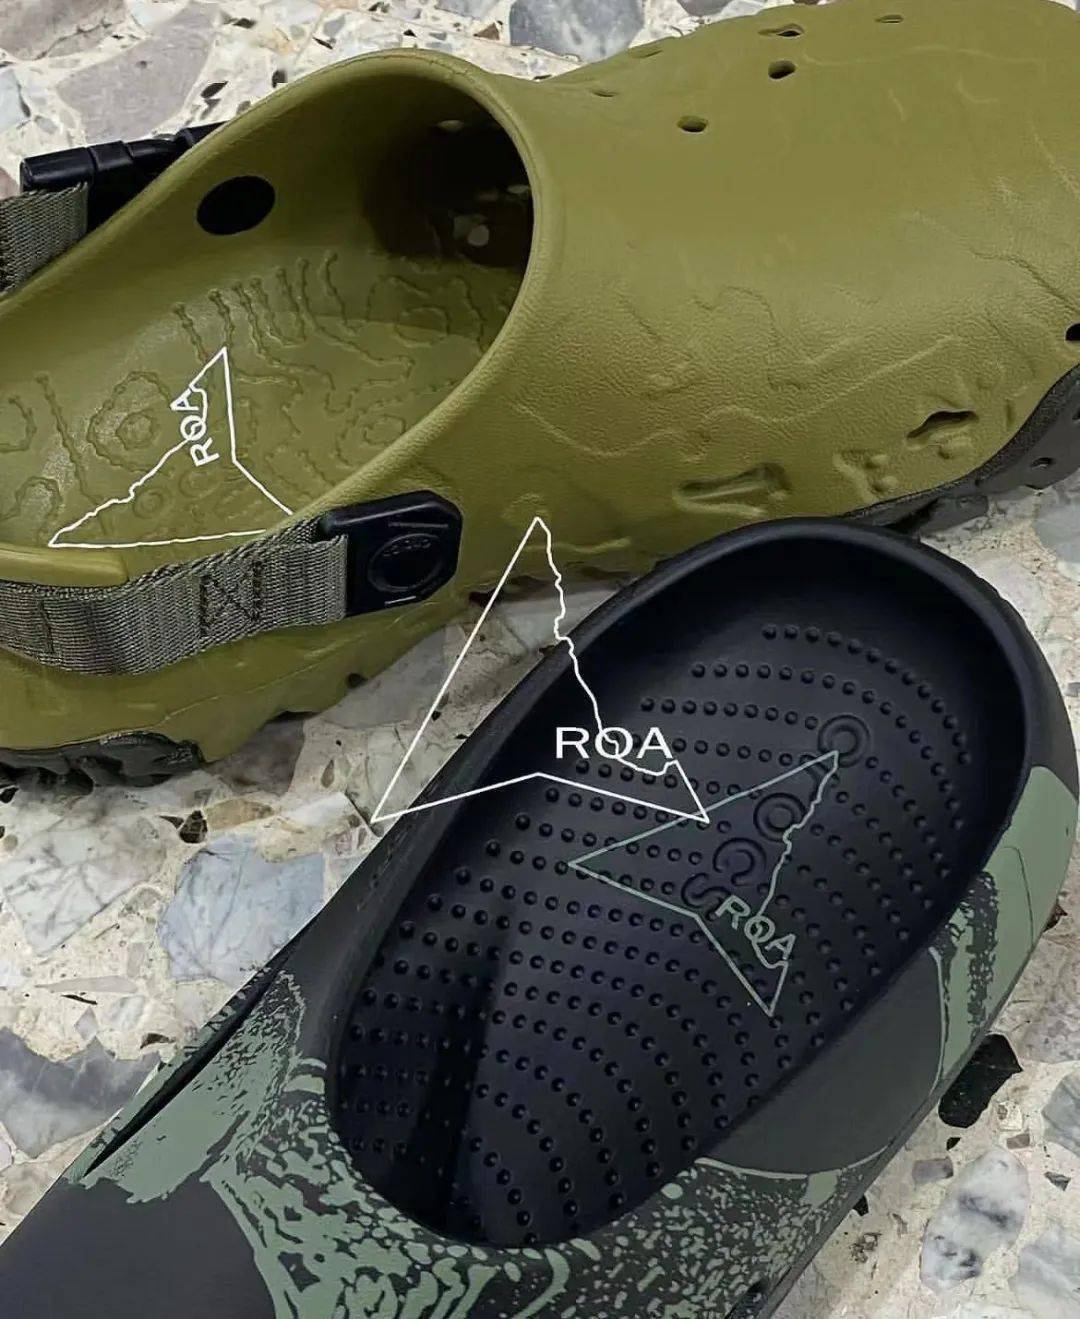 Outdoor Hole Shoes, Roa x Crocs Reserved as One of the Best Collaborations of the Month - Croc Lights®